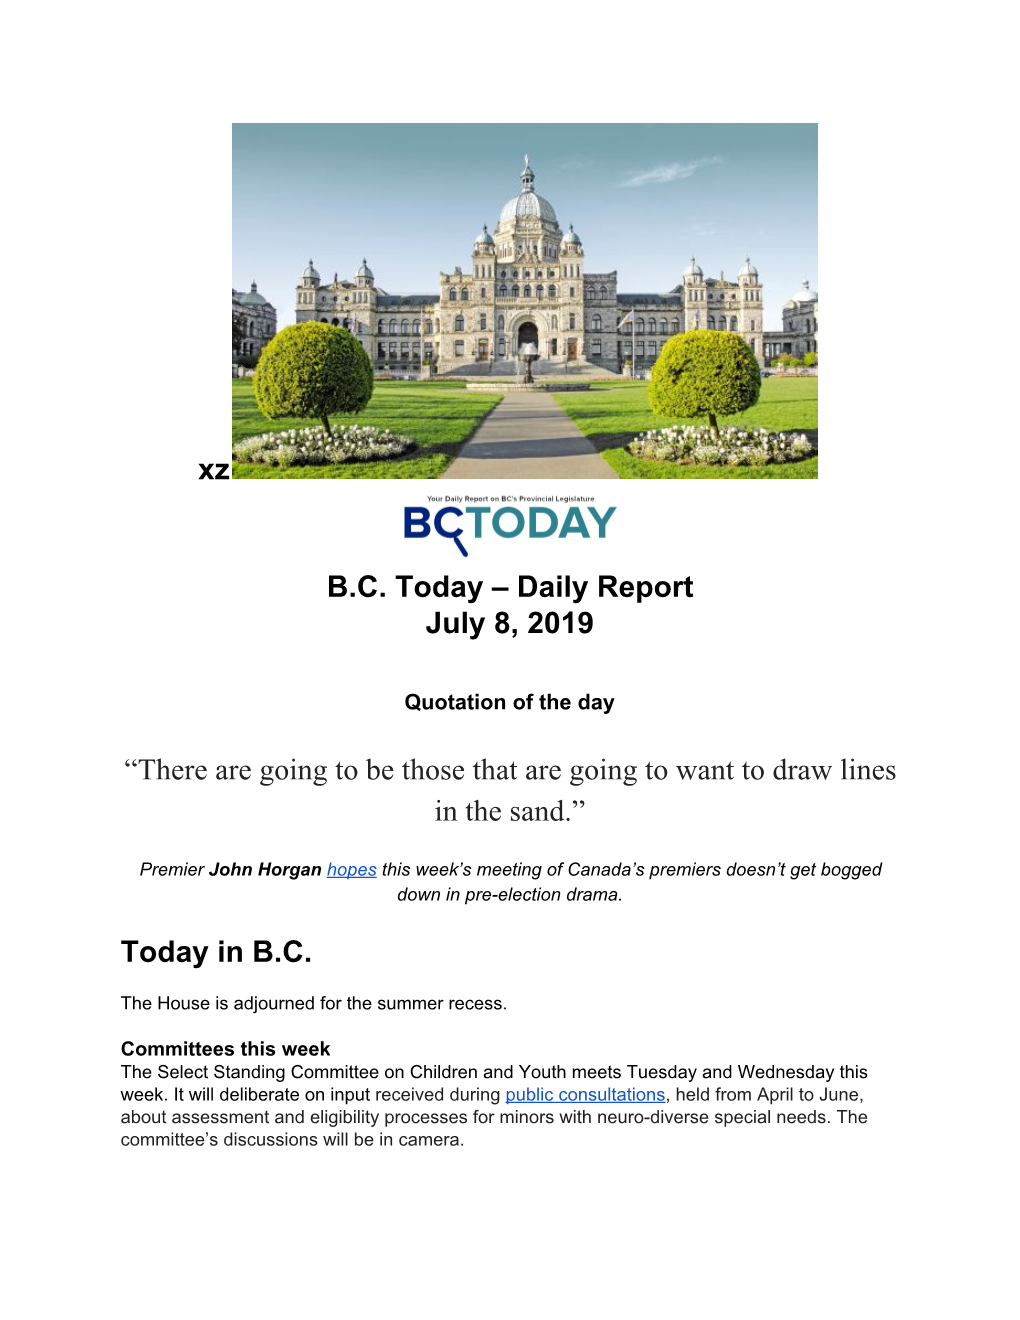 Xz B.C. Today – Daily Report July 8, 2019 “There Are